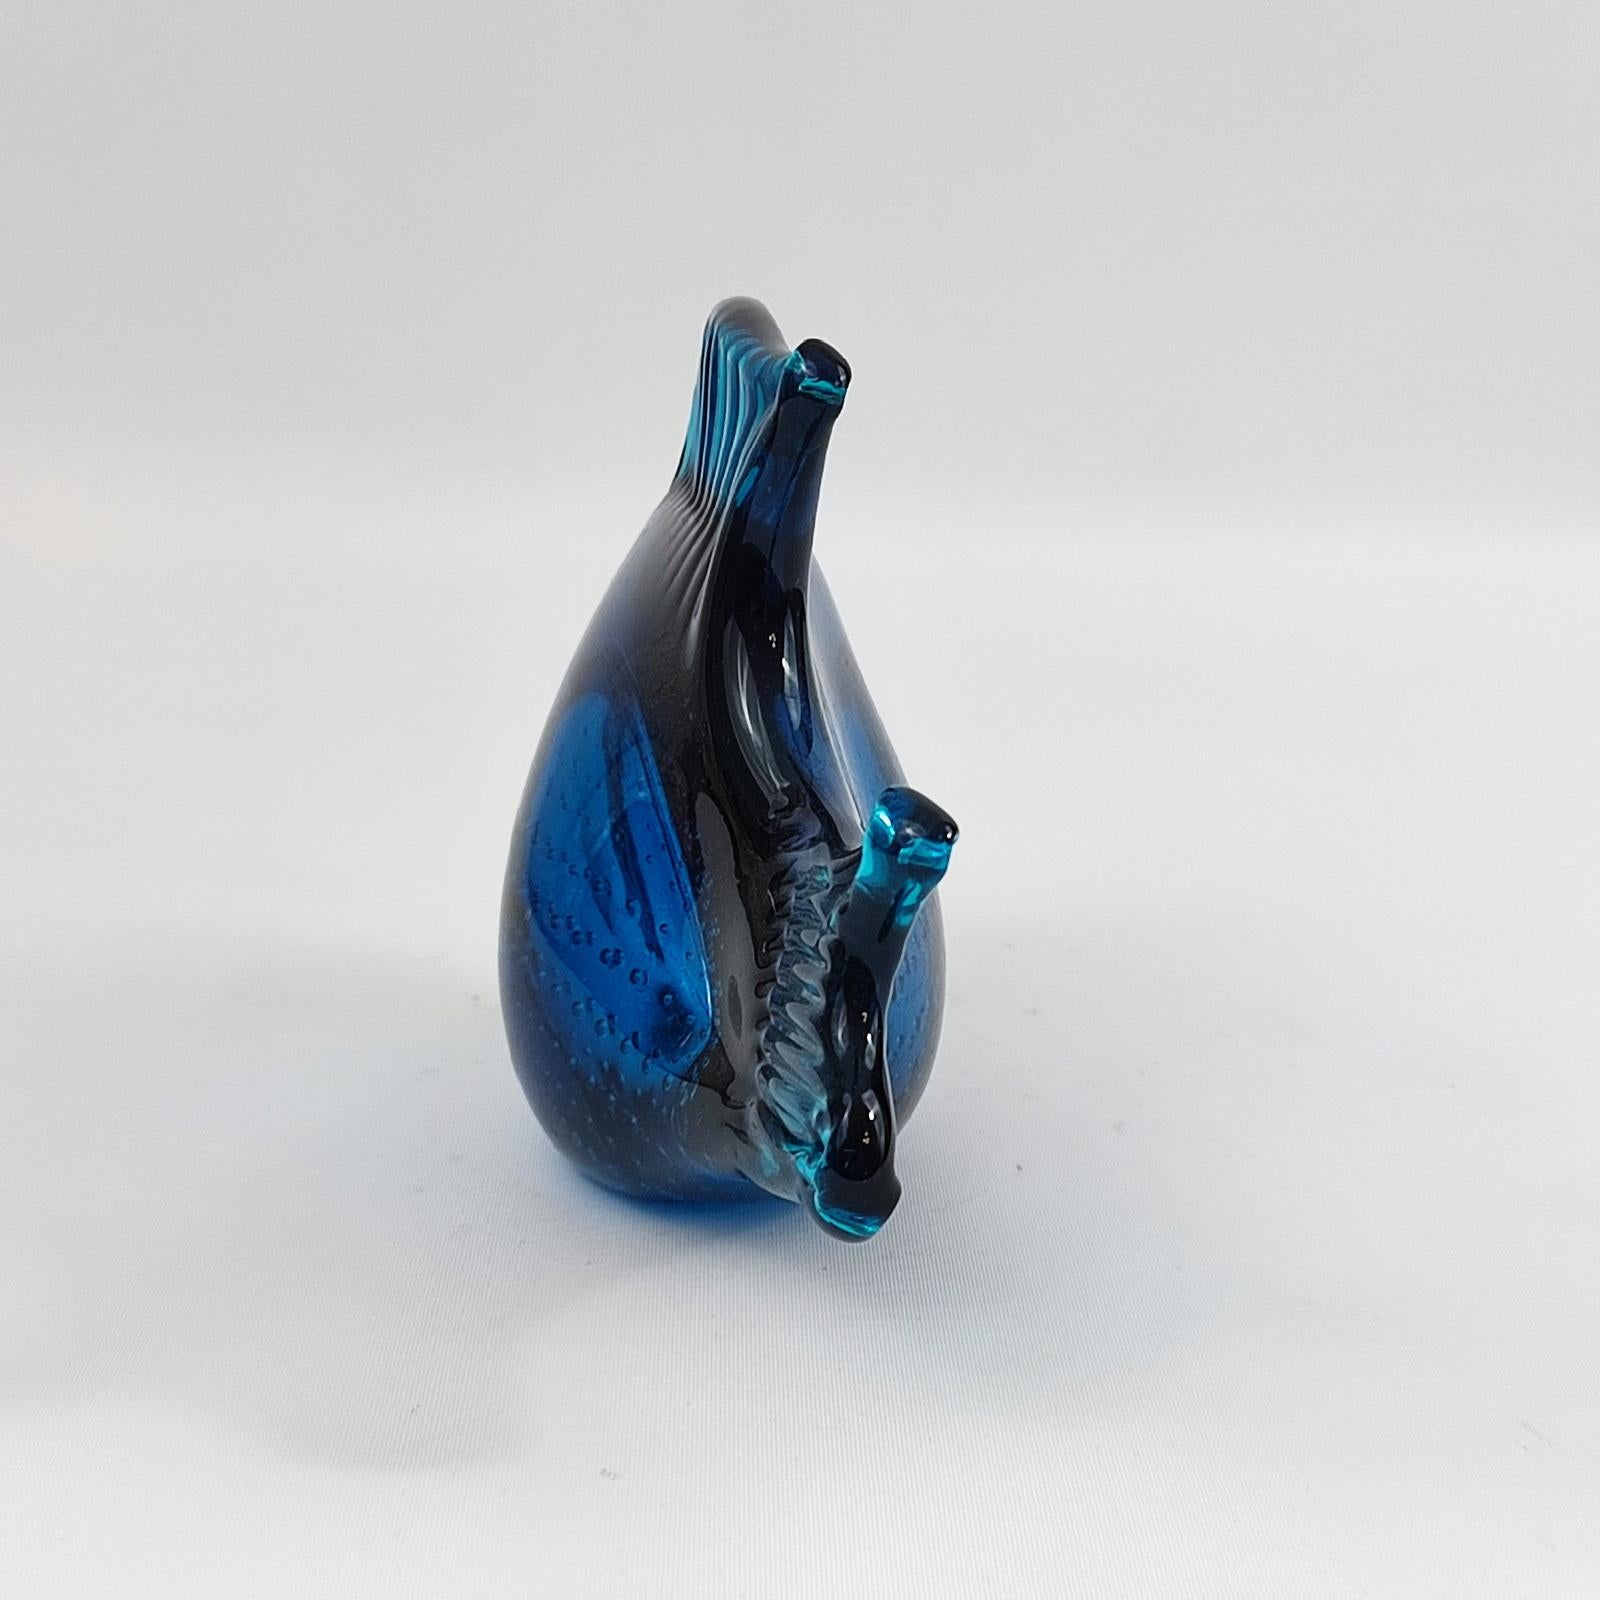 Late 20th Century Ronneby, Sweden, Blue Glass Fish, Art Glass, 1970s - FREE SHIPPING For Sale